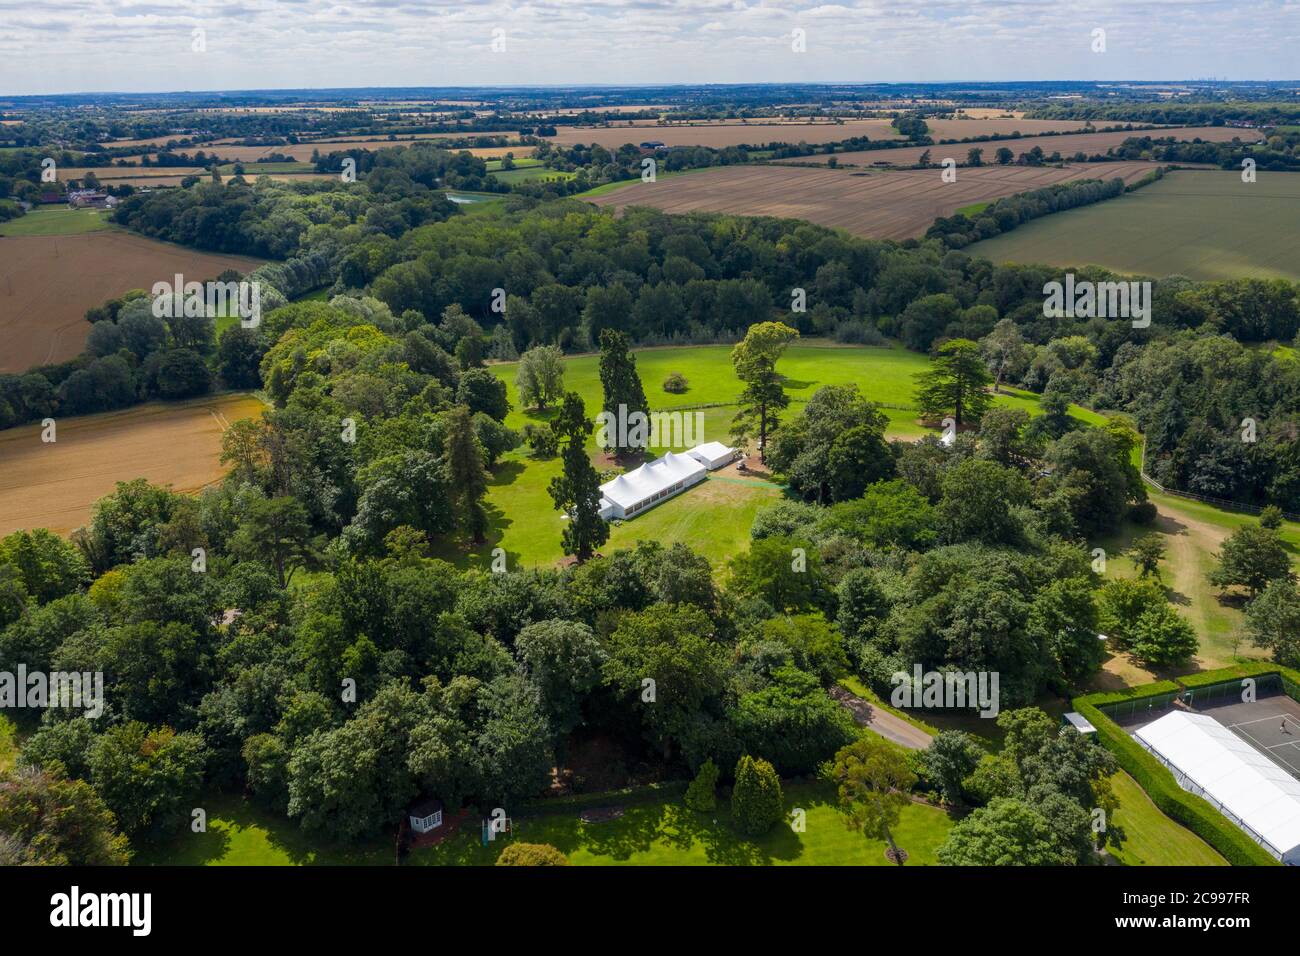 Essex, UK. 29th July 2020. The iconic white tent from British TV series 'The Great British Bake Off' in the grounds of its new filming location at the Down Hall Hotel in Bishop's Stortford, Essex. Credit: Ricci Fothergill/Alamy Live News Stock Photo